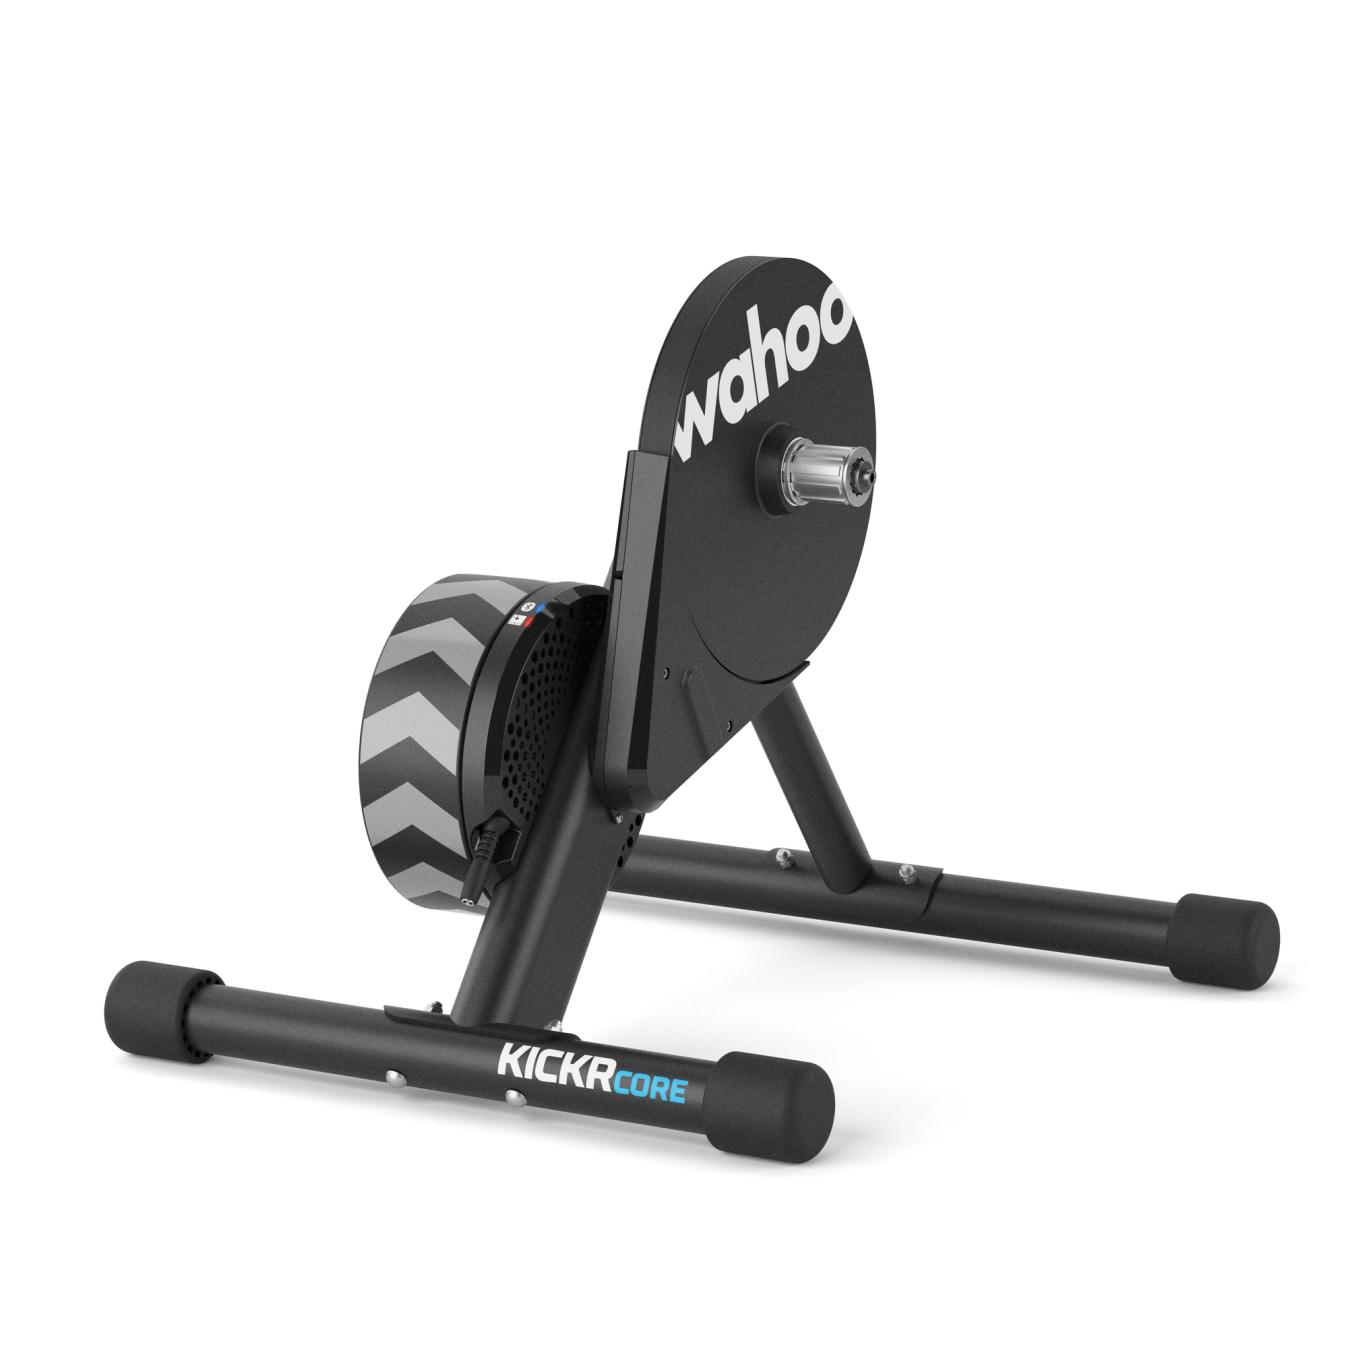 The Kickr Core is the cheapest direct-drive trainer from Wahoo